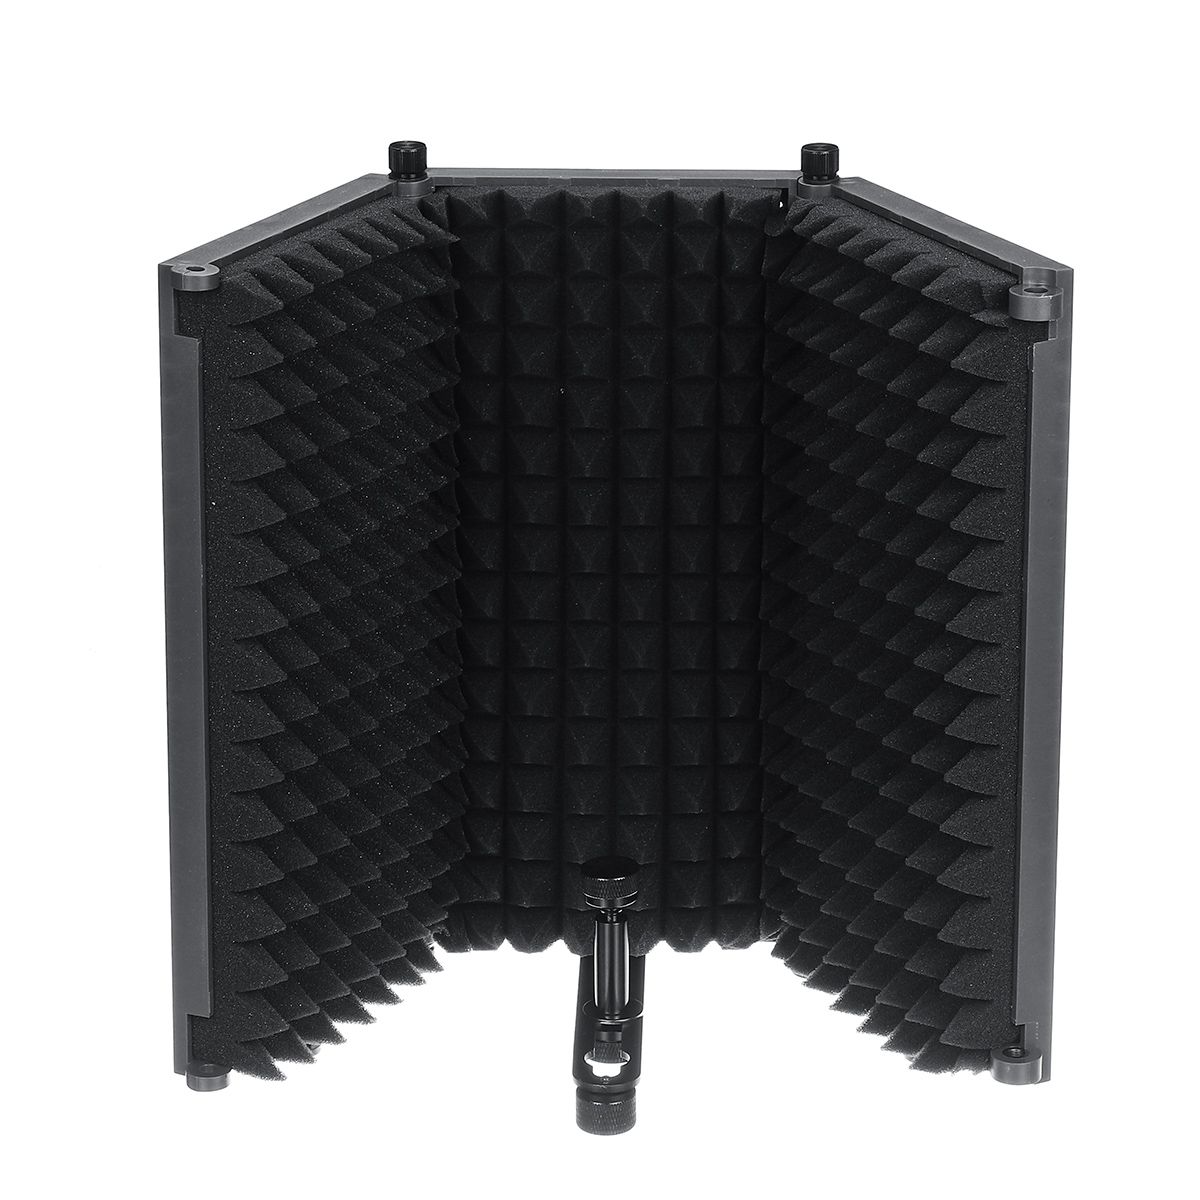 3-Plate-Foldable-Recording-Microphone-Wind-Screen-Board-Microphone-Isolation-Shield-For-Recording-St-1763817